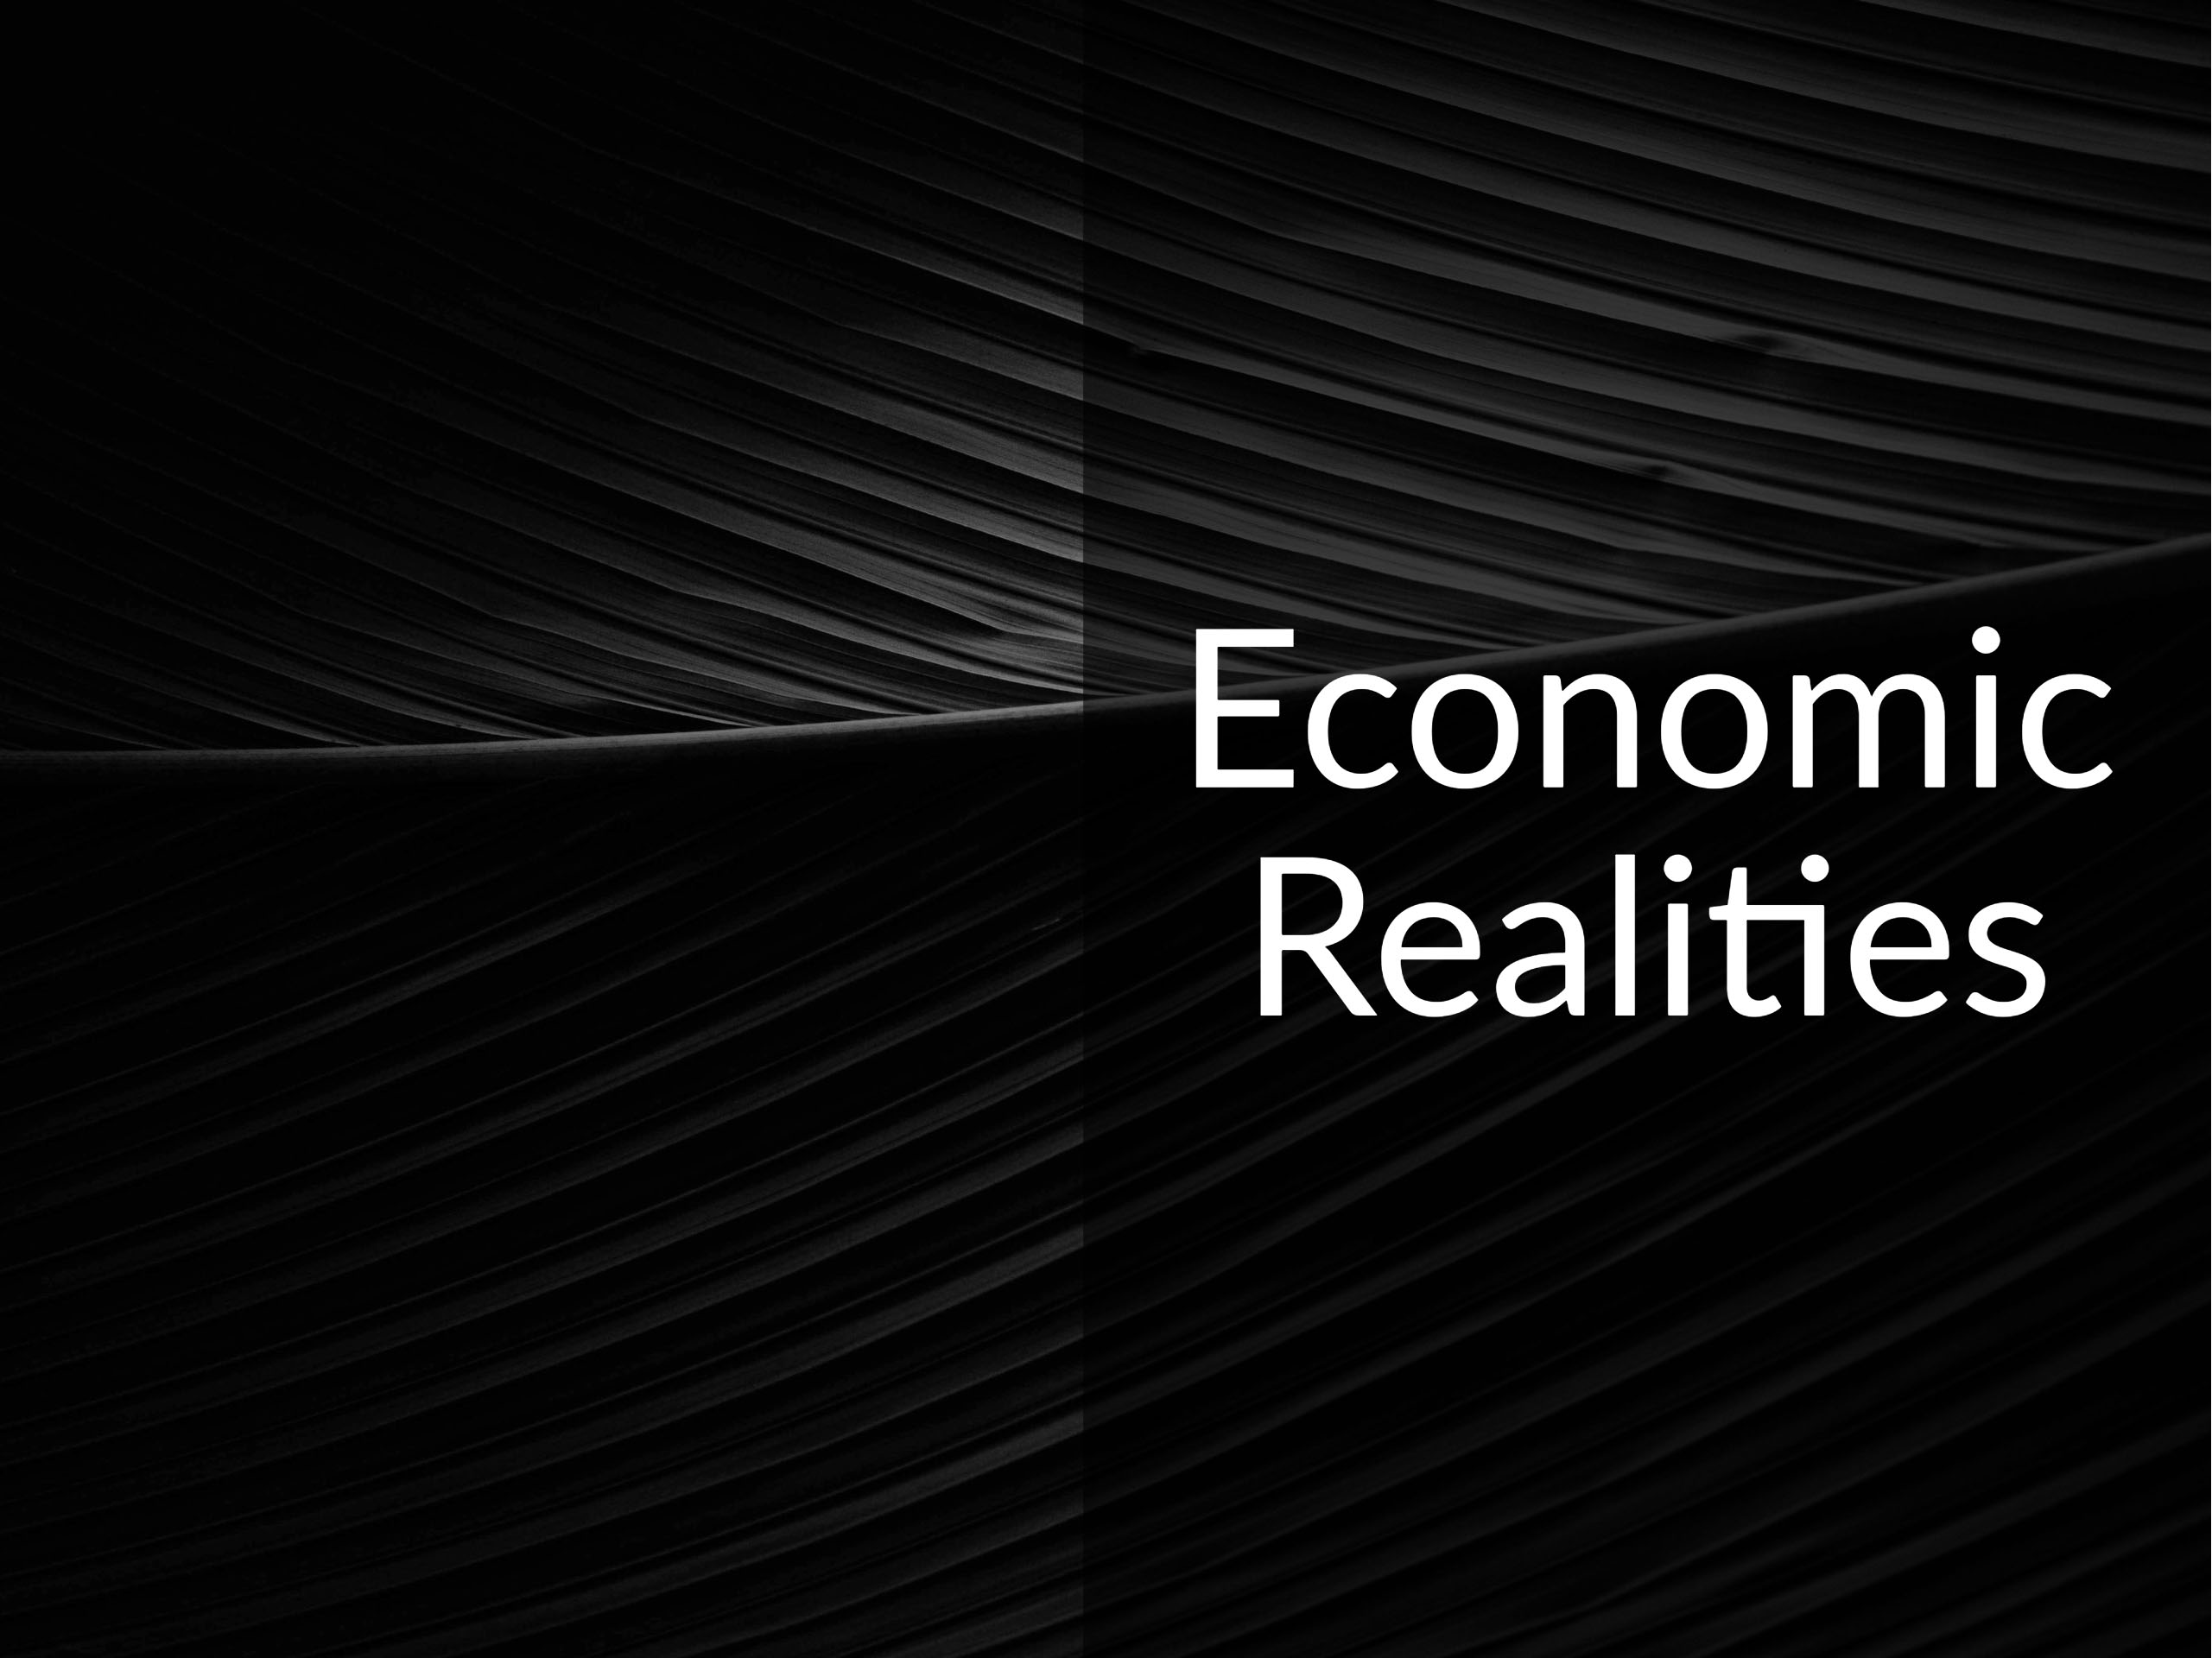 Large dark leaf in monochrome with the caption "Economic Realities"